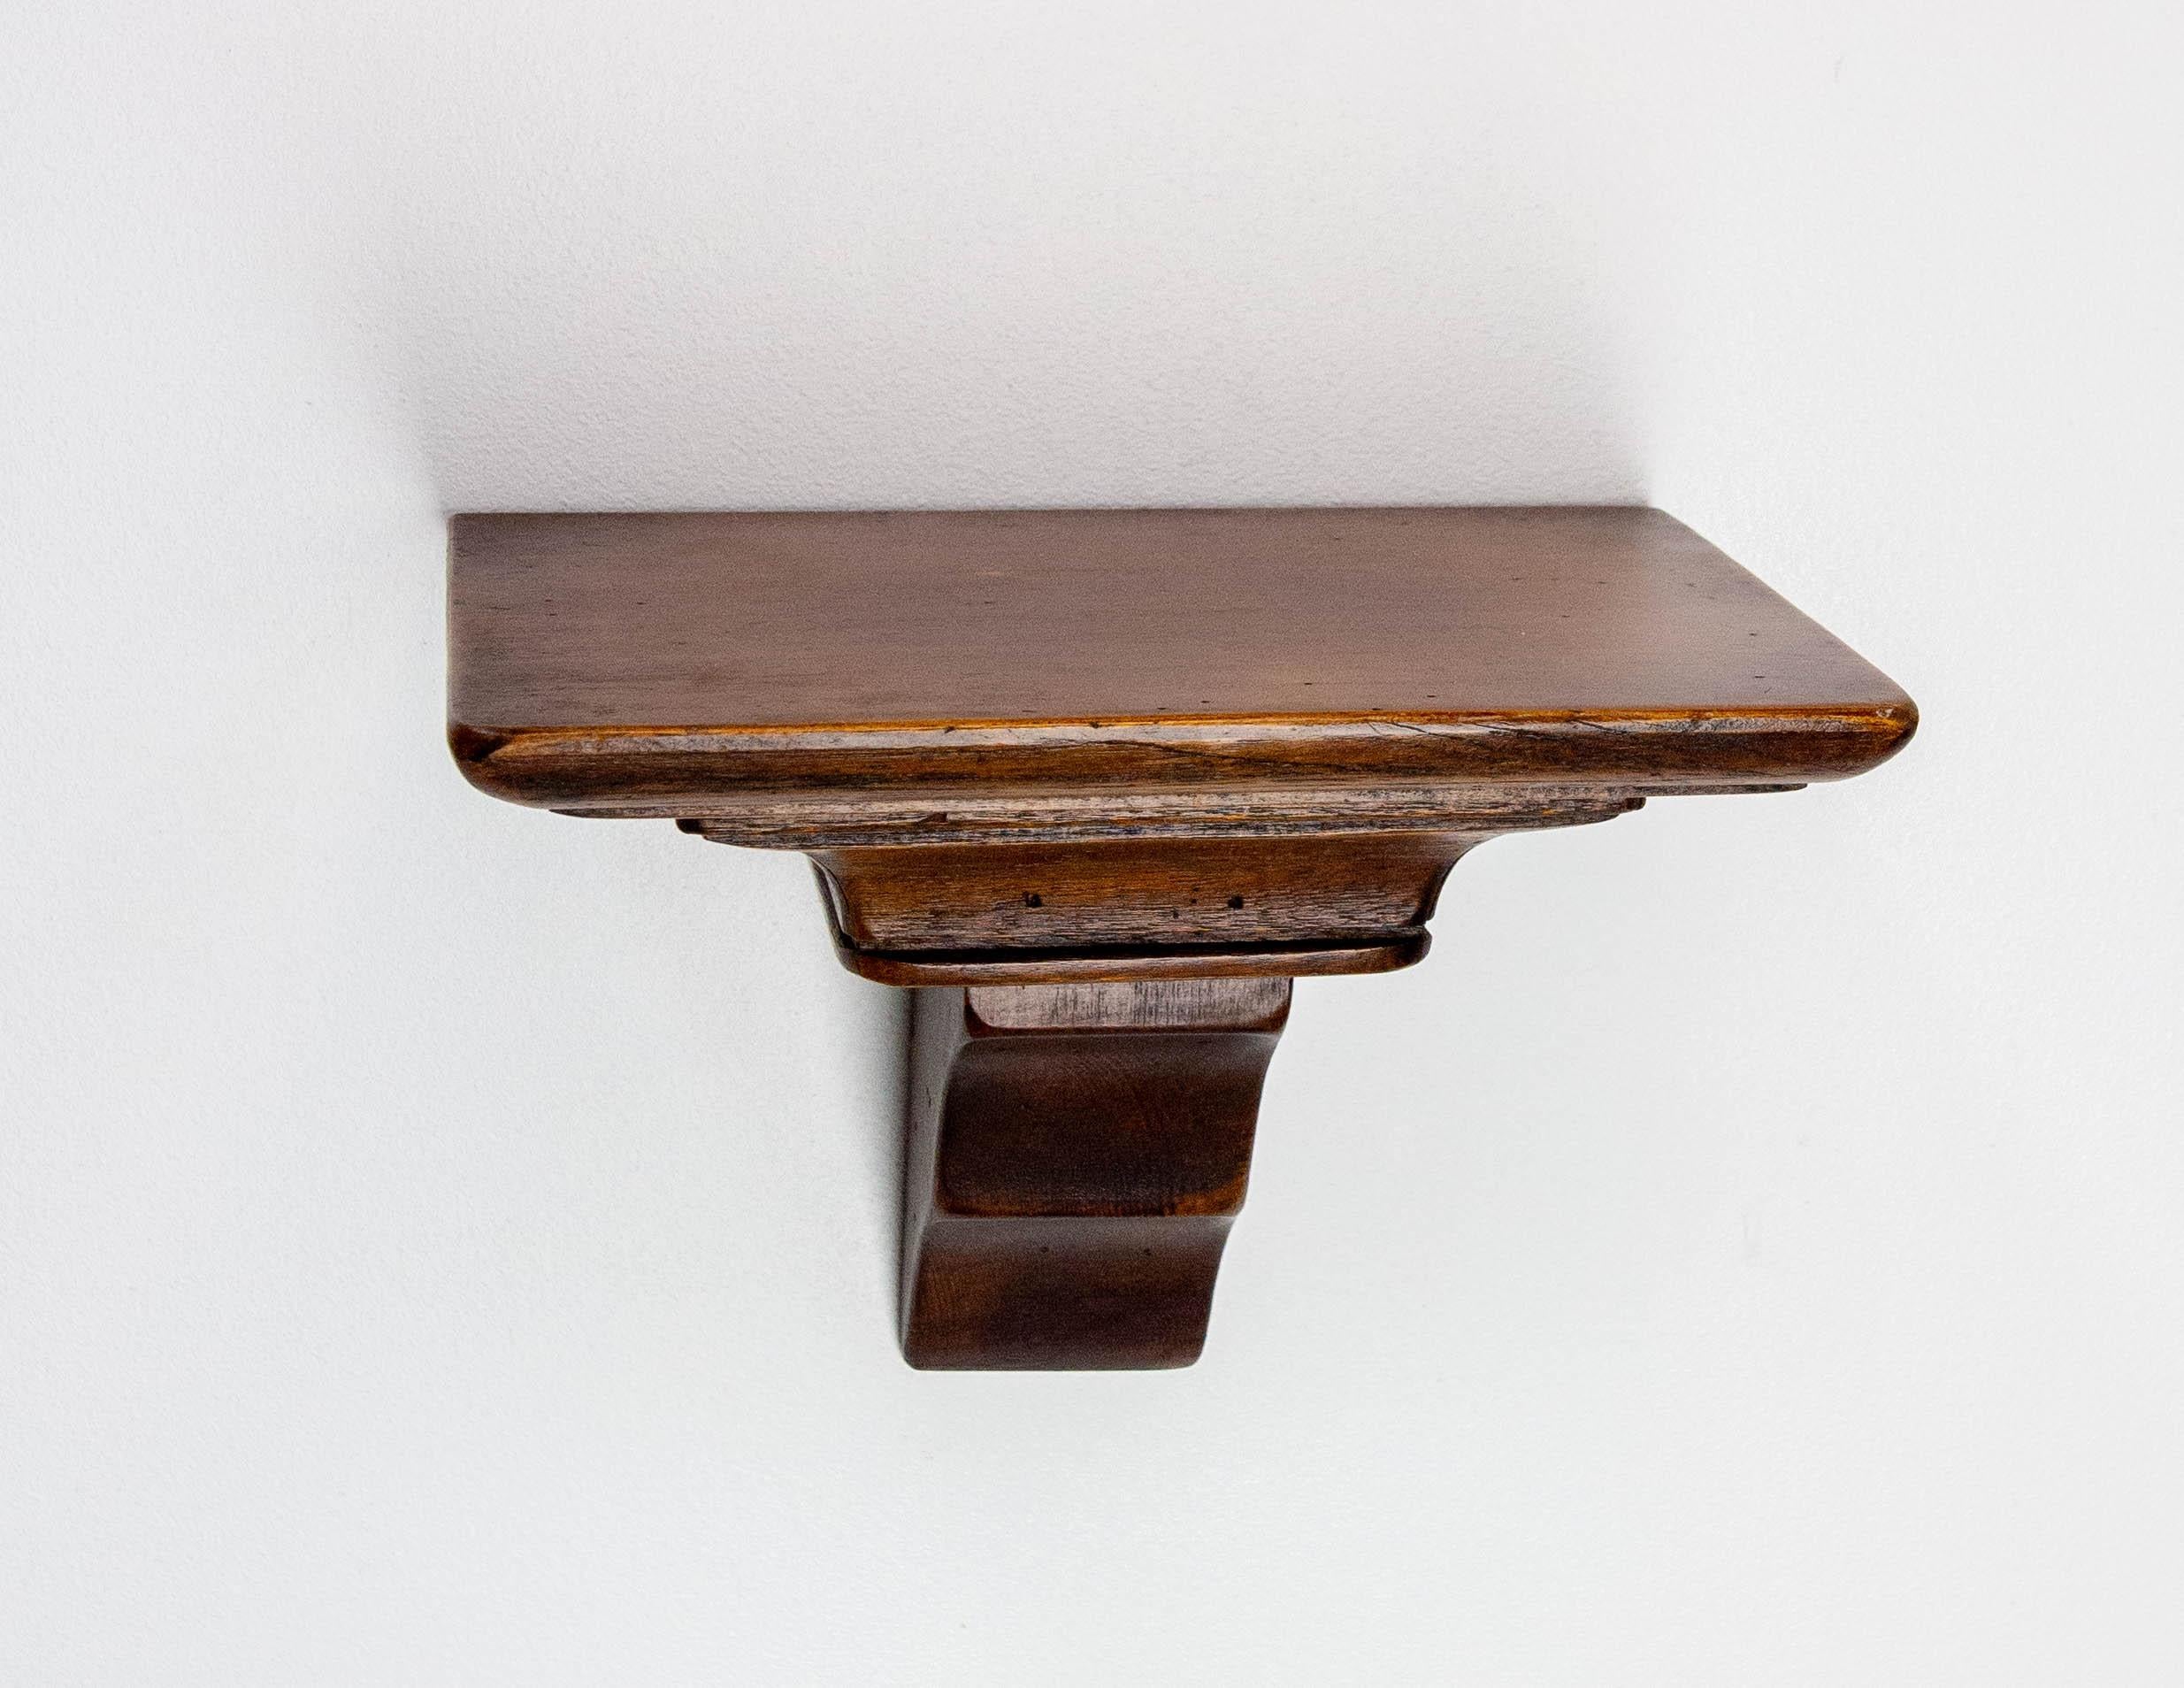 This Little Pedestal Shelf can hold a statuette, a plant or a lamp. It was made in the middle of the 20th century.
Oak 
Good condition.

Shipping:
18.5 / 20 / 28 cm 1.5 kg.